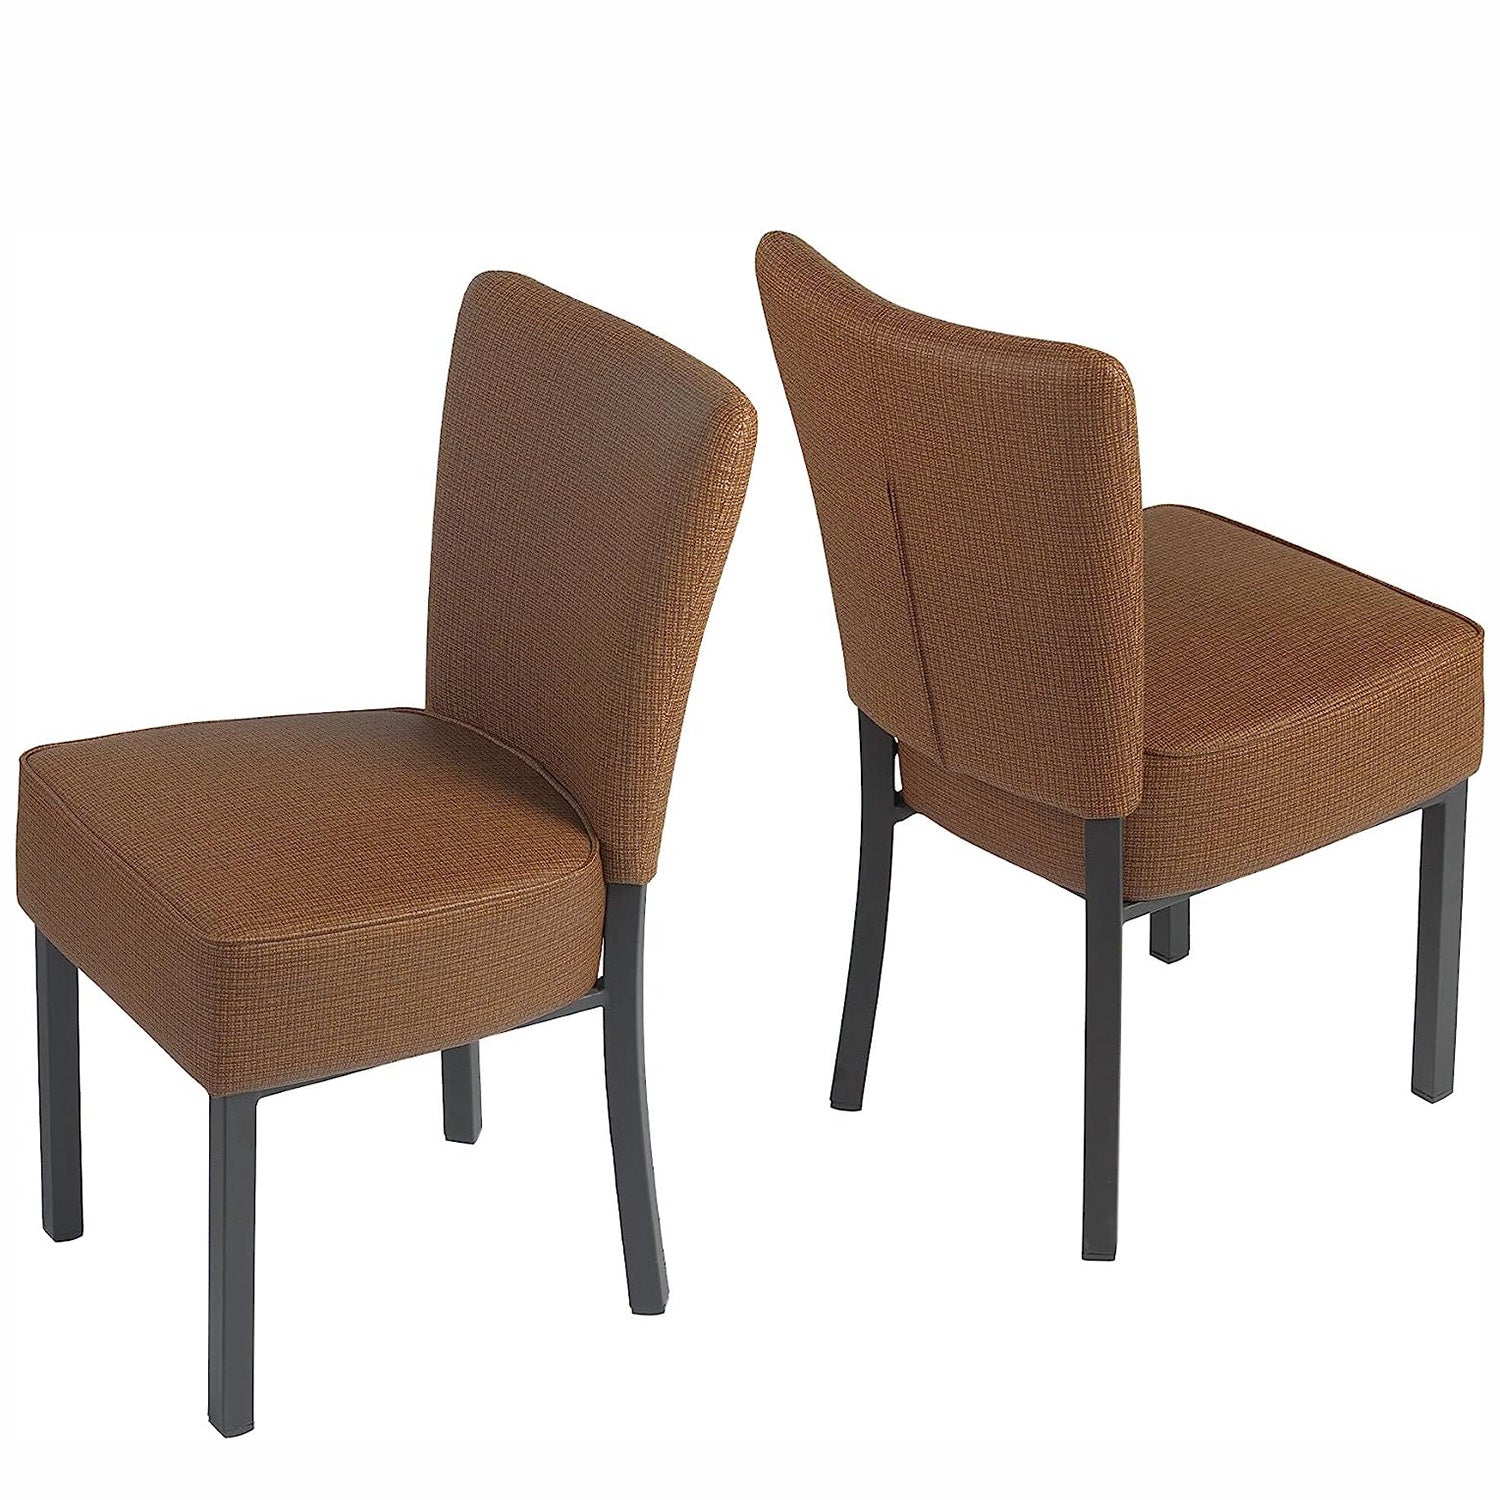 LUCKYERMORE Set of 2 Upholstered Dining Chairs PU Leather Modern Dining Room Chairs, Coffee